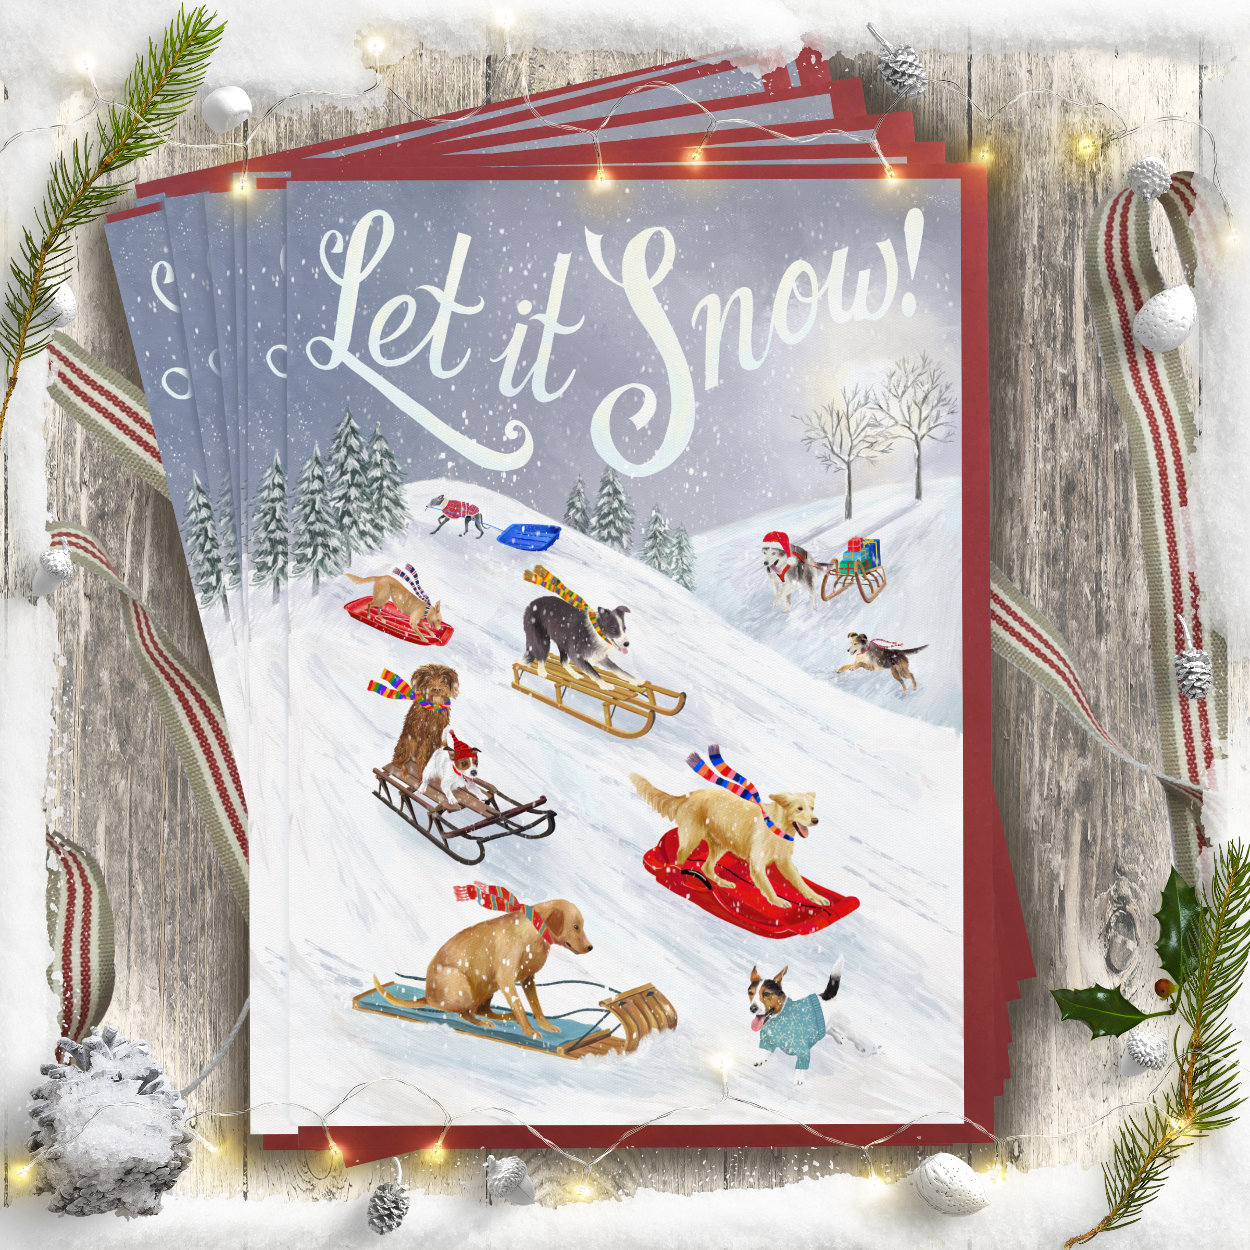 Let it Snow Dog Christmas card | The Enlightened Hound